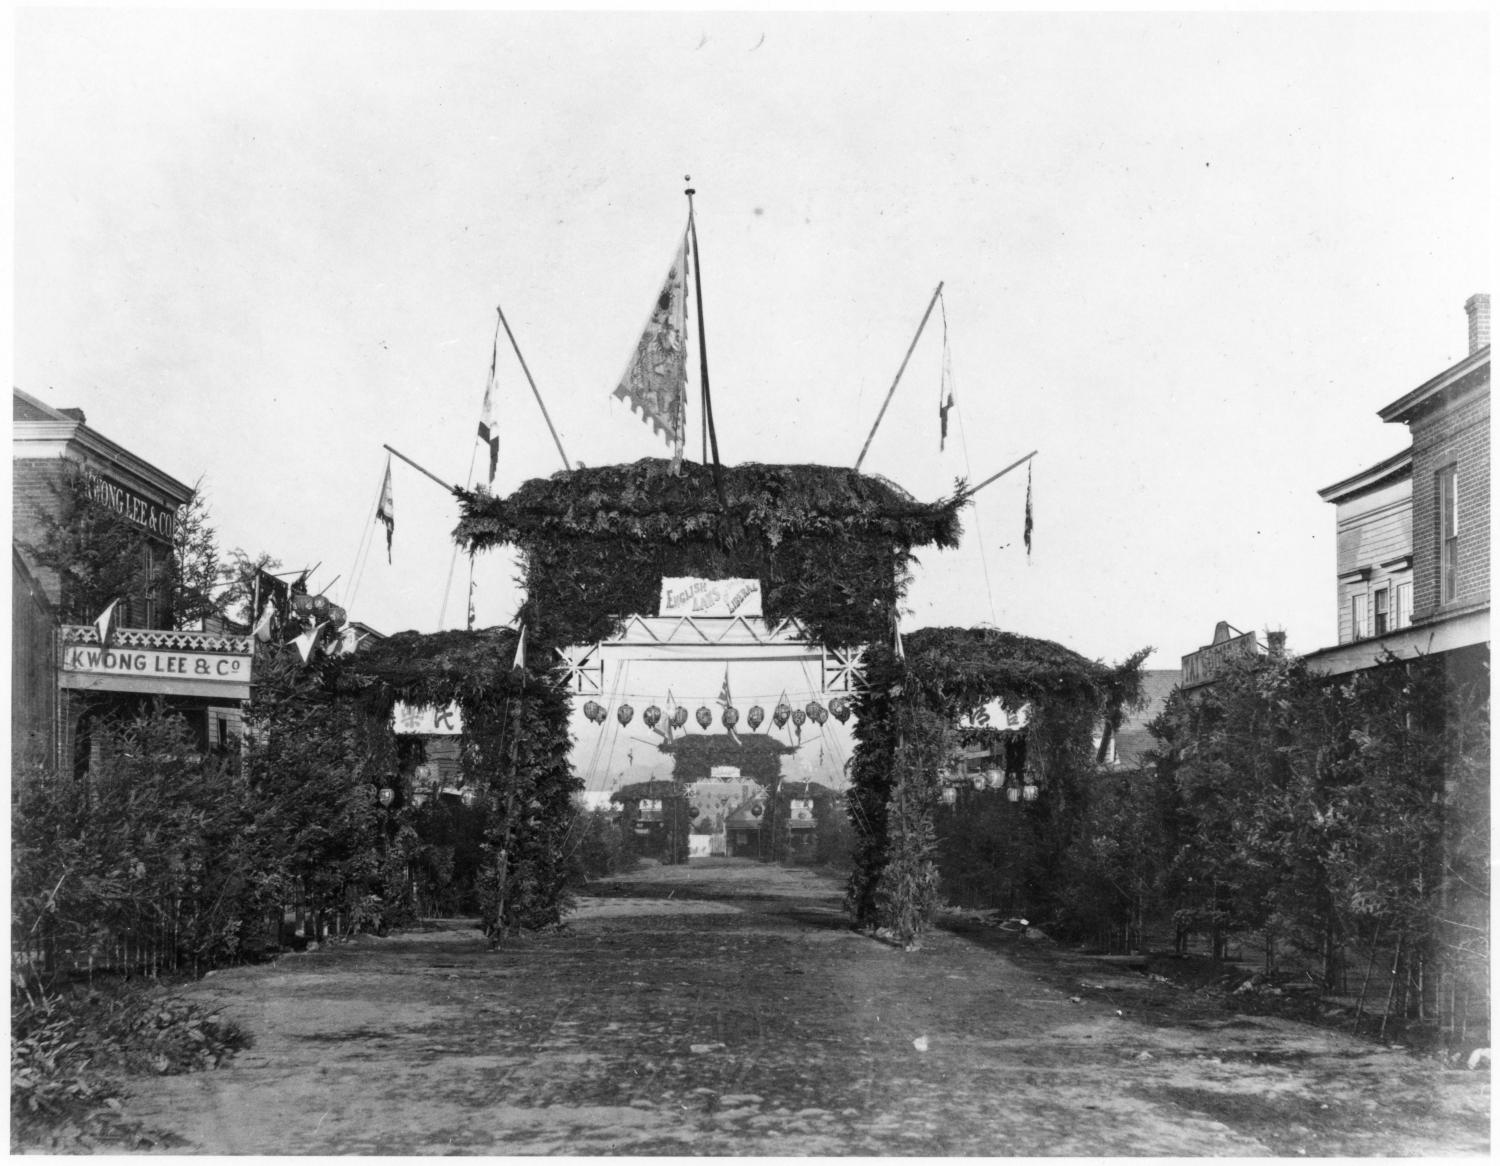 Second Chinese Arch on Cormorant Street Erected for visit of the Earl of Dufferin, Governor-General of Canada. Photographer/Artist: Dally, Frederick, 1838-1914. 1866-1870. BC Archives E-01926.